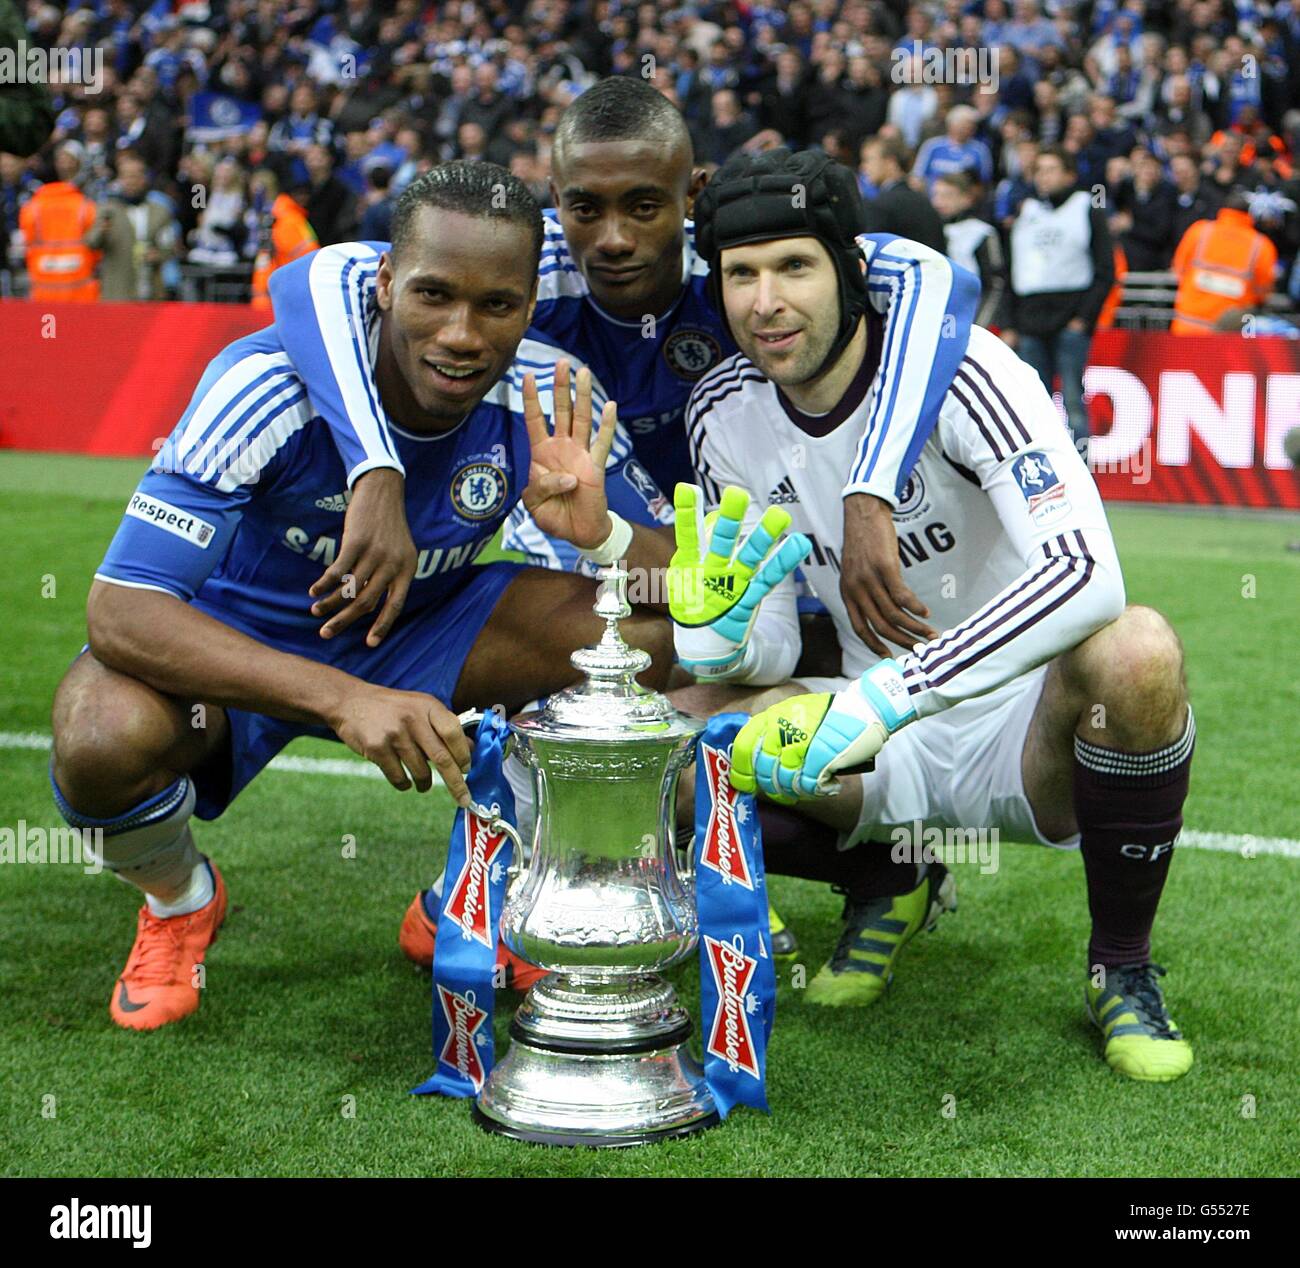 Vellykket karakter Strengt Chelsea's Didier Drogba (left), Salomon Kalou and goalkeeper Petr Cech  (right) celebrate with the FA Cup trophy after victory over Liverpool Stock  Photo - Alamy